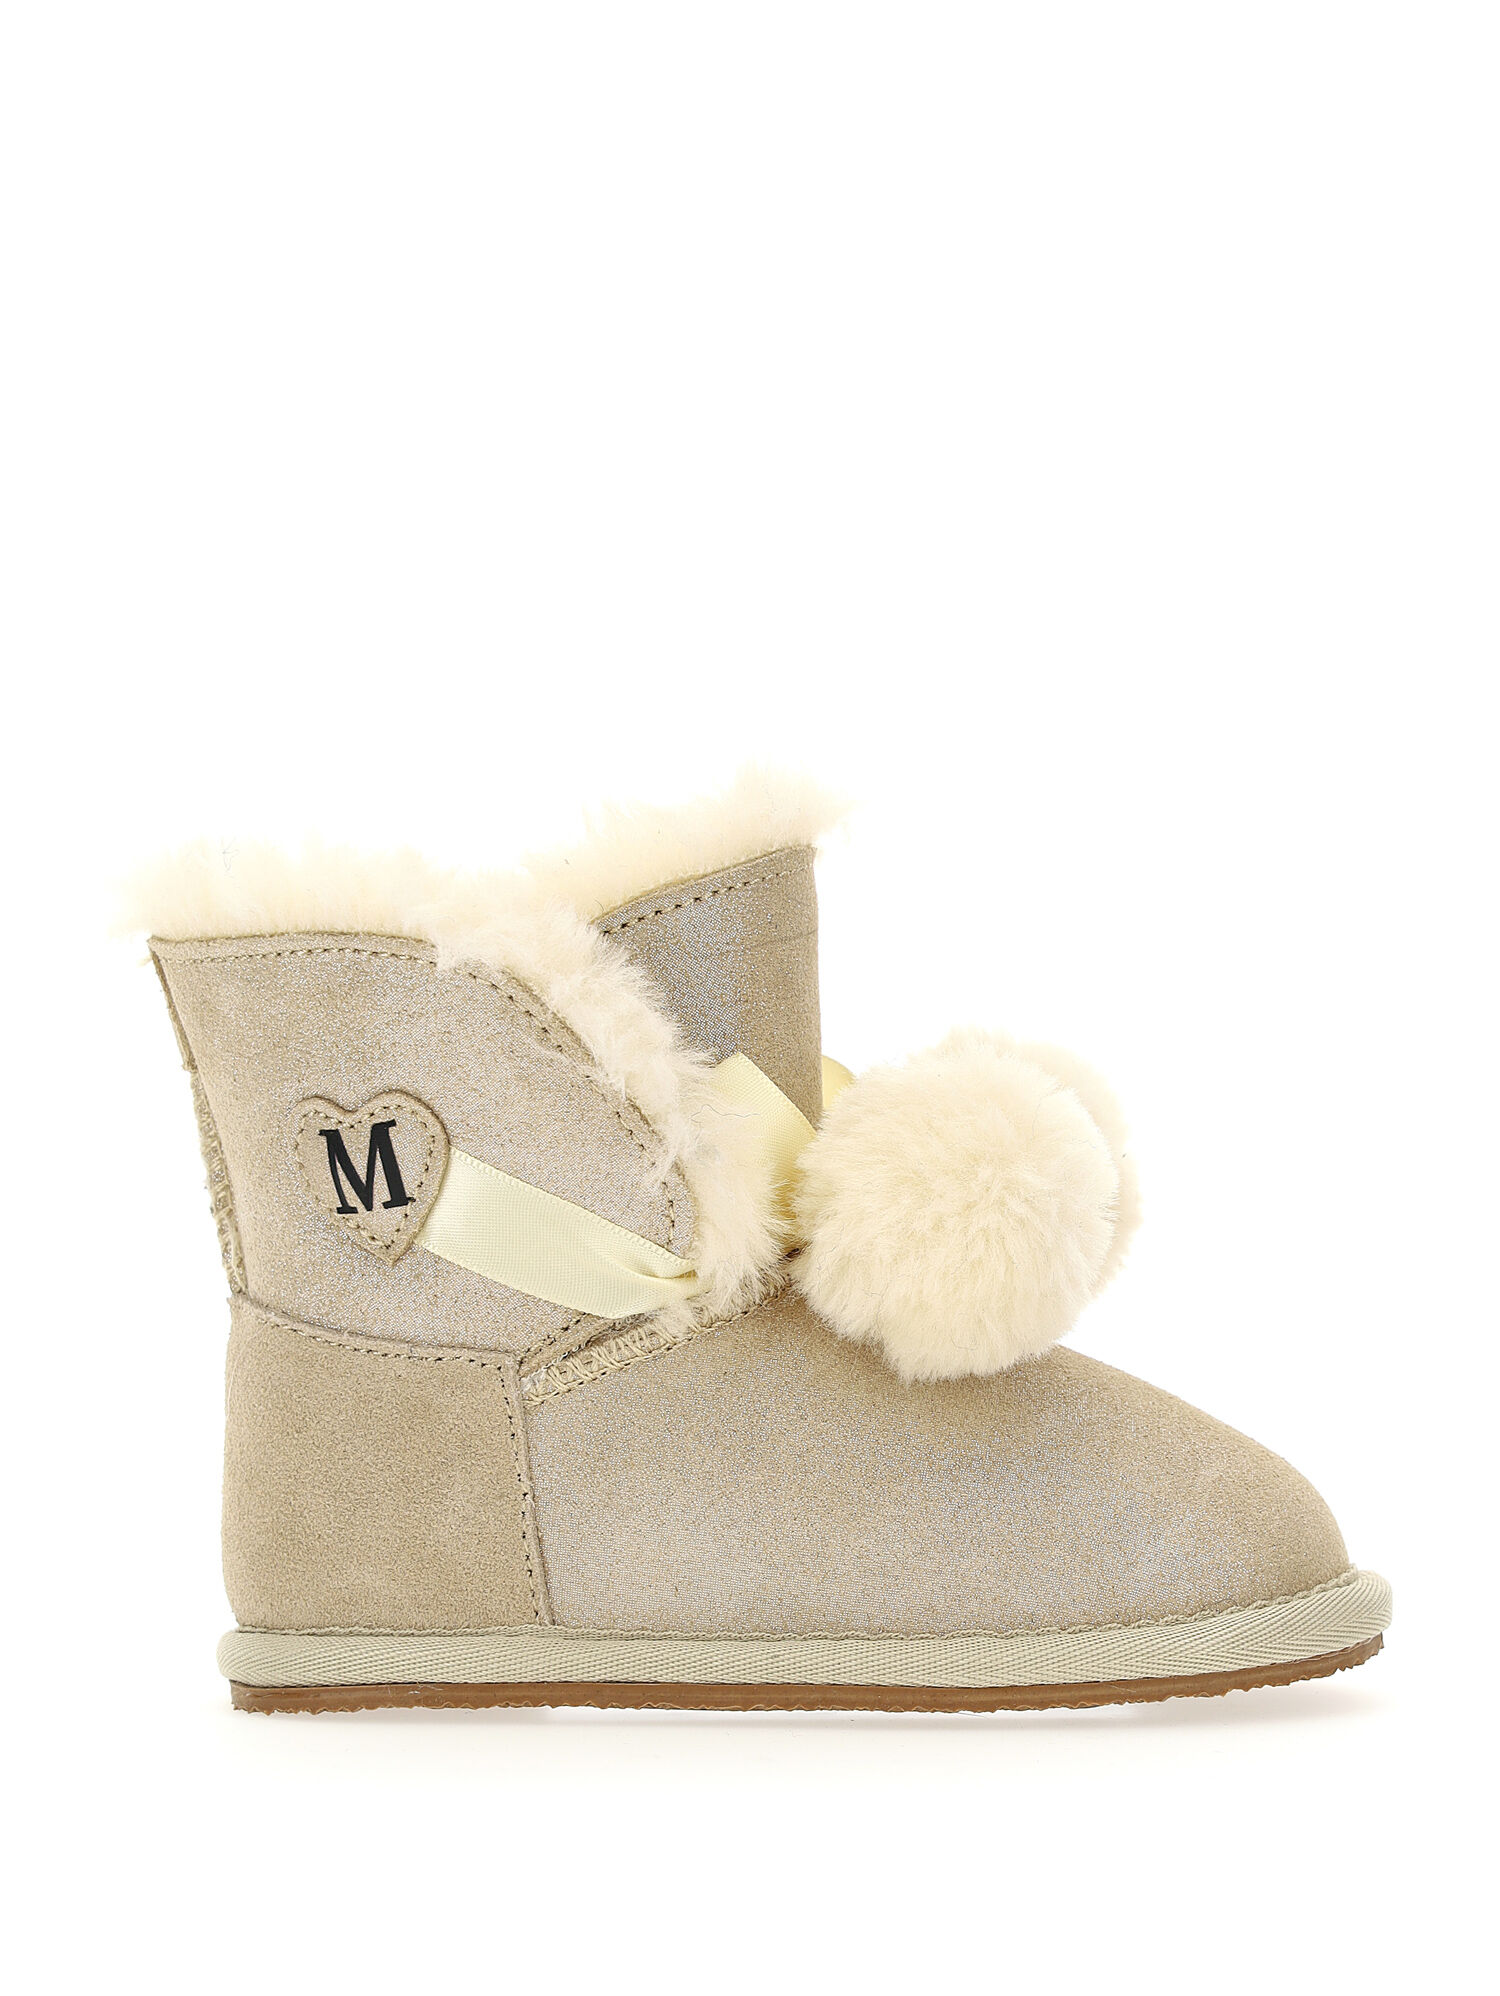 Crusted leather ankle boots with pom poms Monnalisa Girls Shoes Boots Ankle Boots 